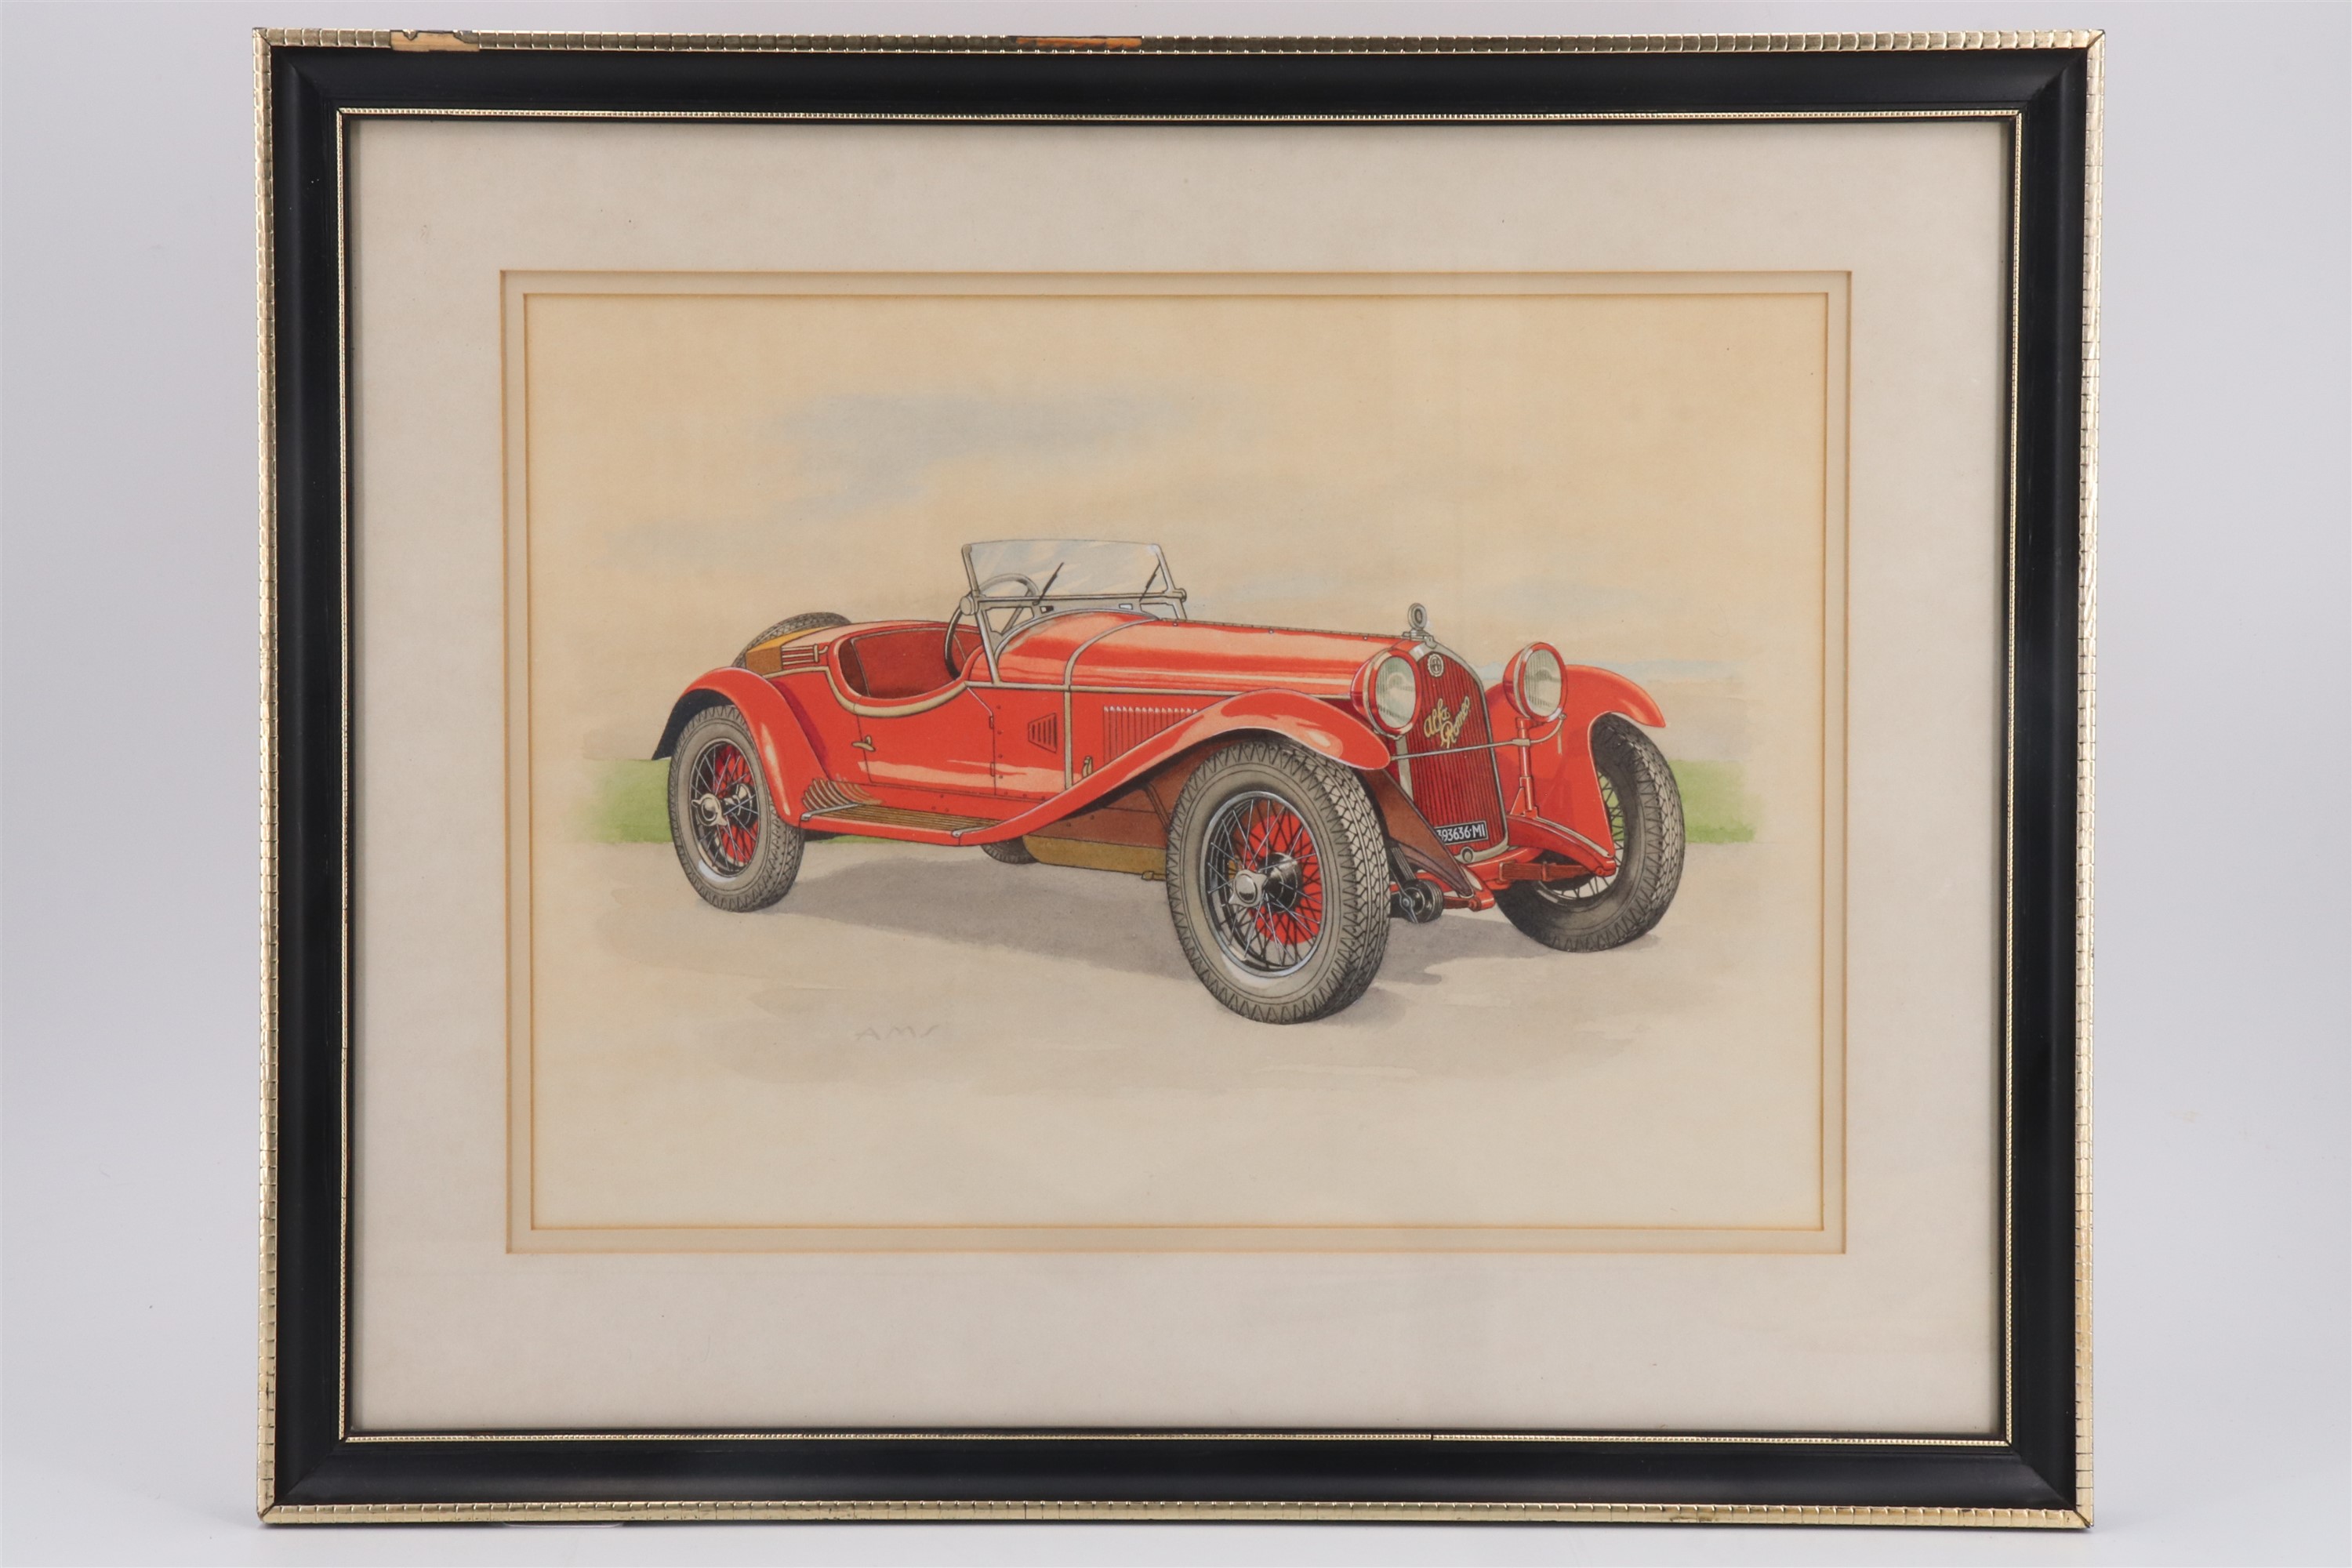 A 20th Century depiction of the Alfa Romeo, 1933 8C 2300 Monza sports car, watercolour, - Image 2 of 2